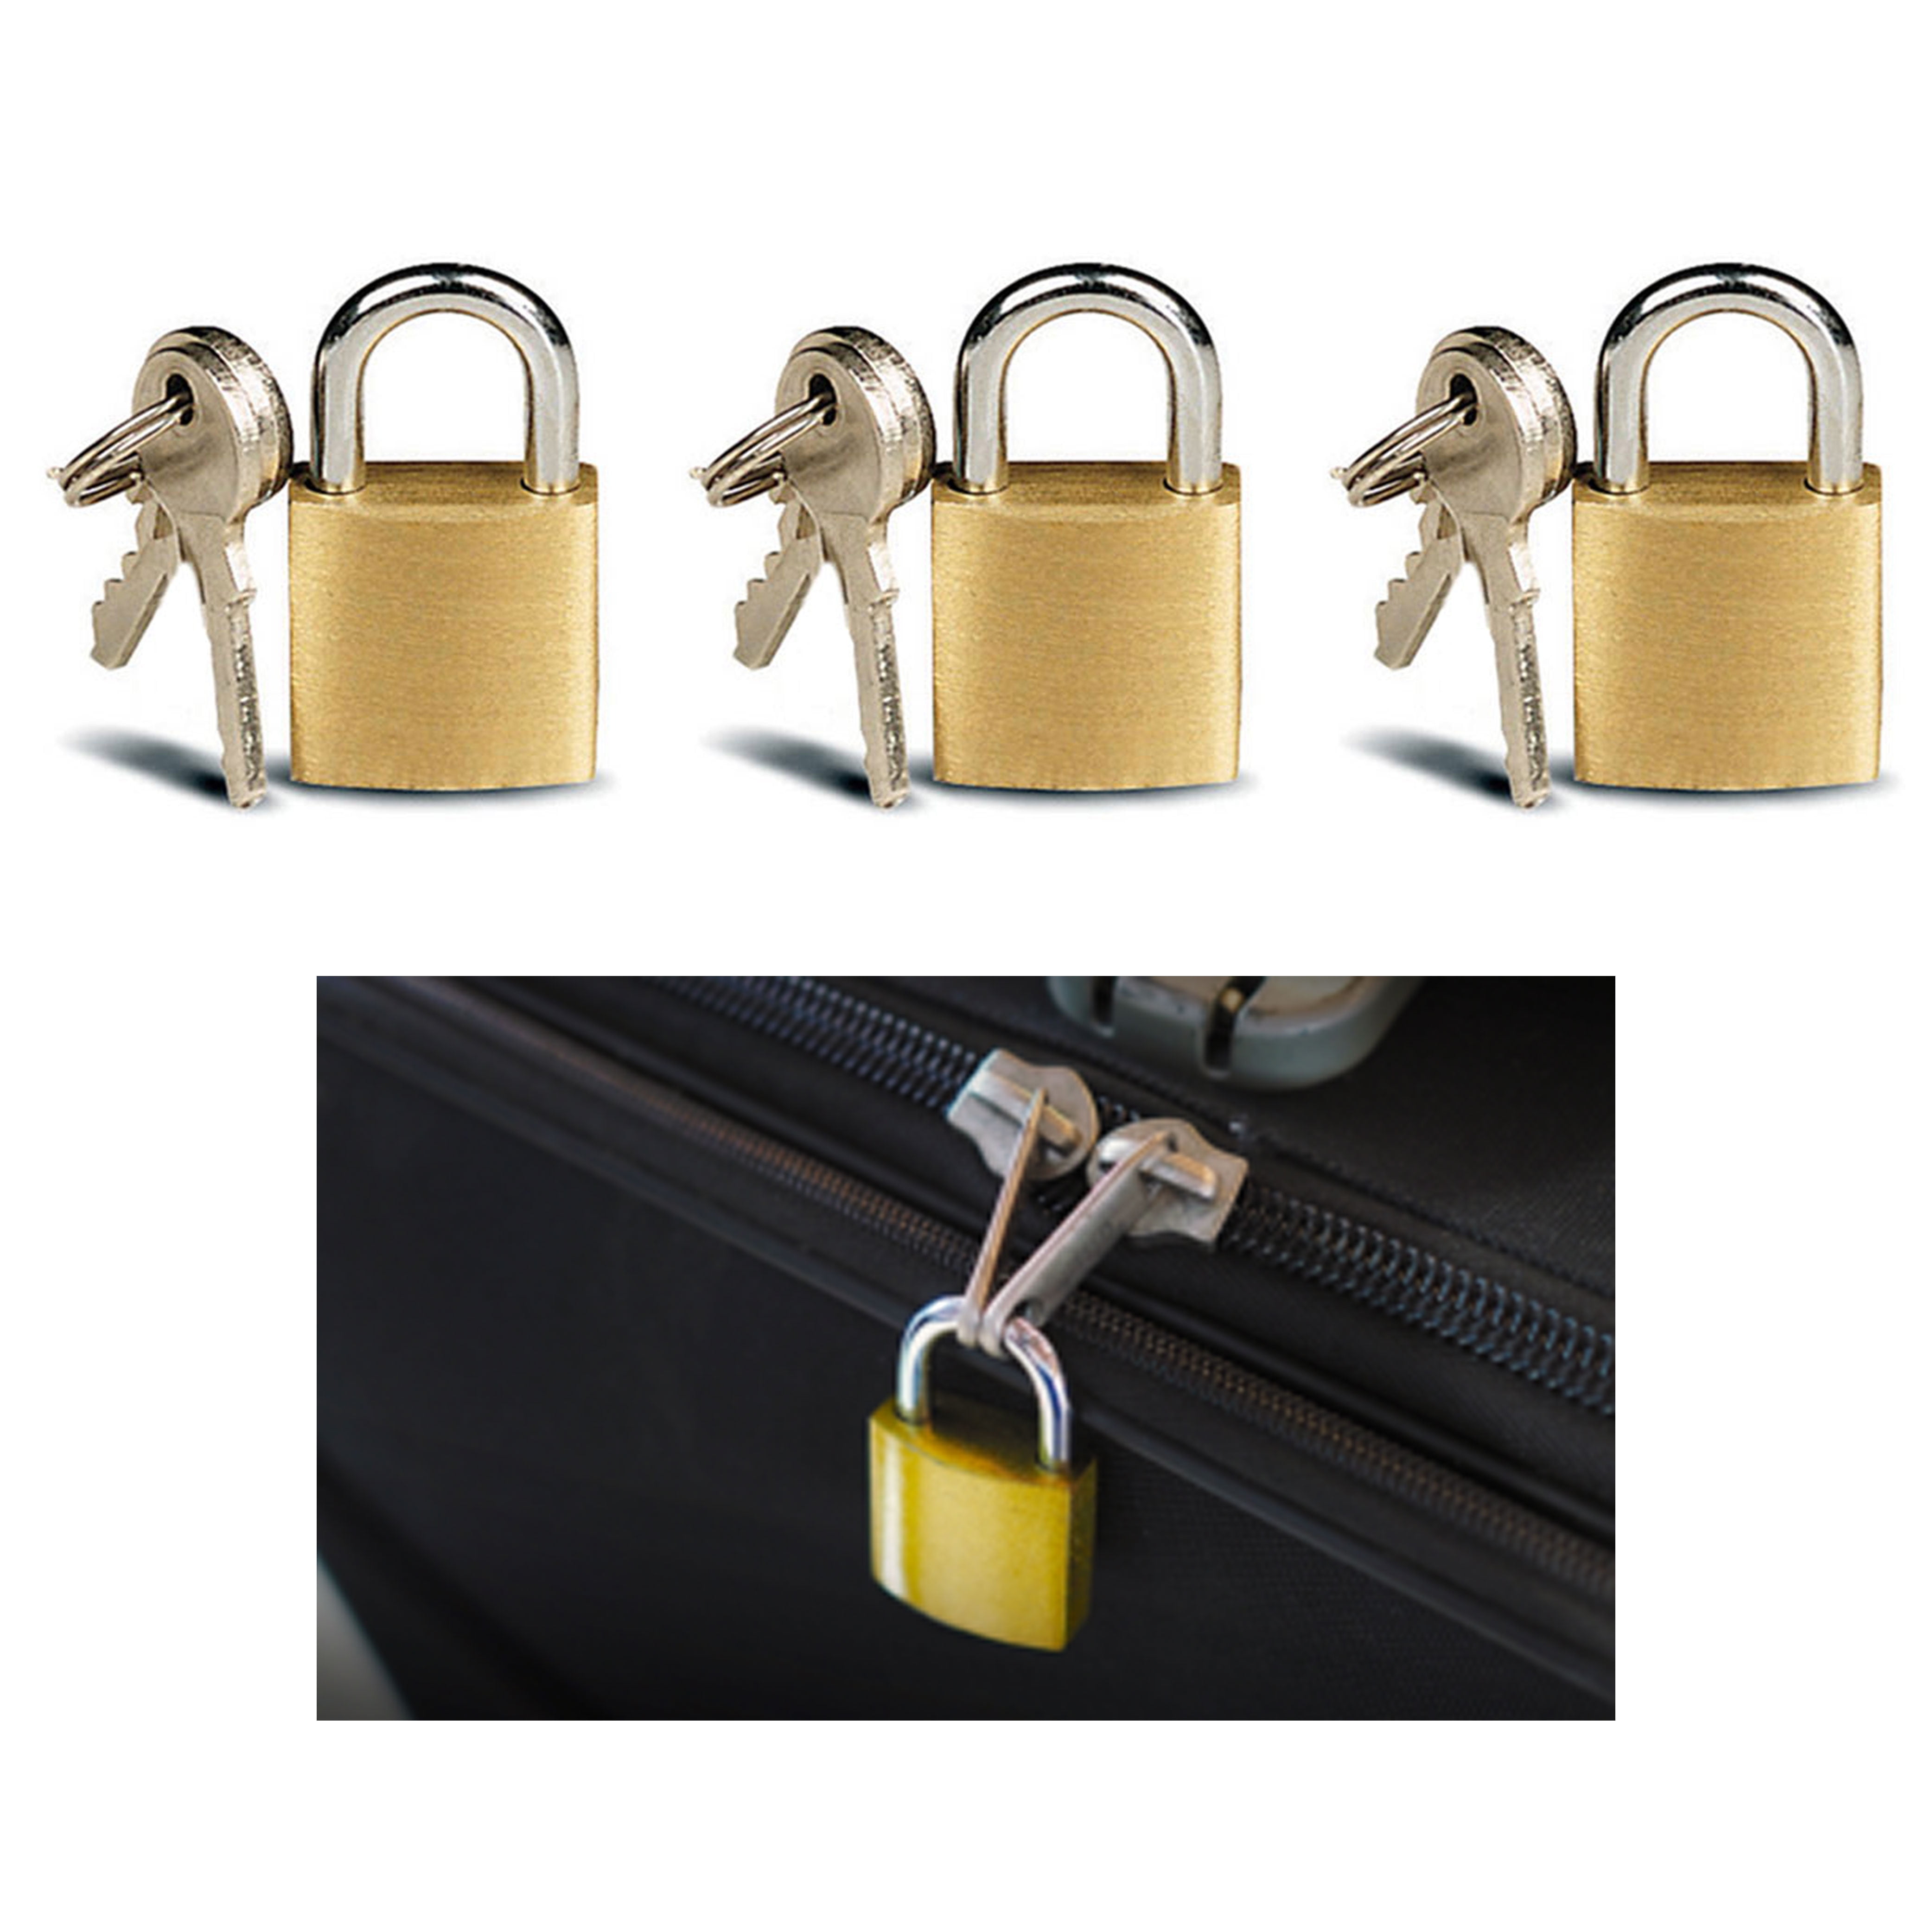 Details about   3PCS Metal Square Padlocks with Key Fits for Suitcase & Cabinet 